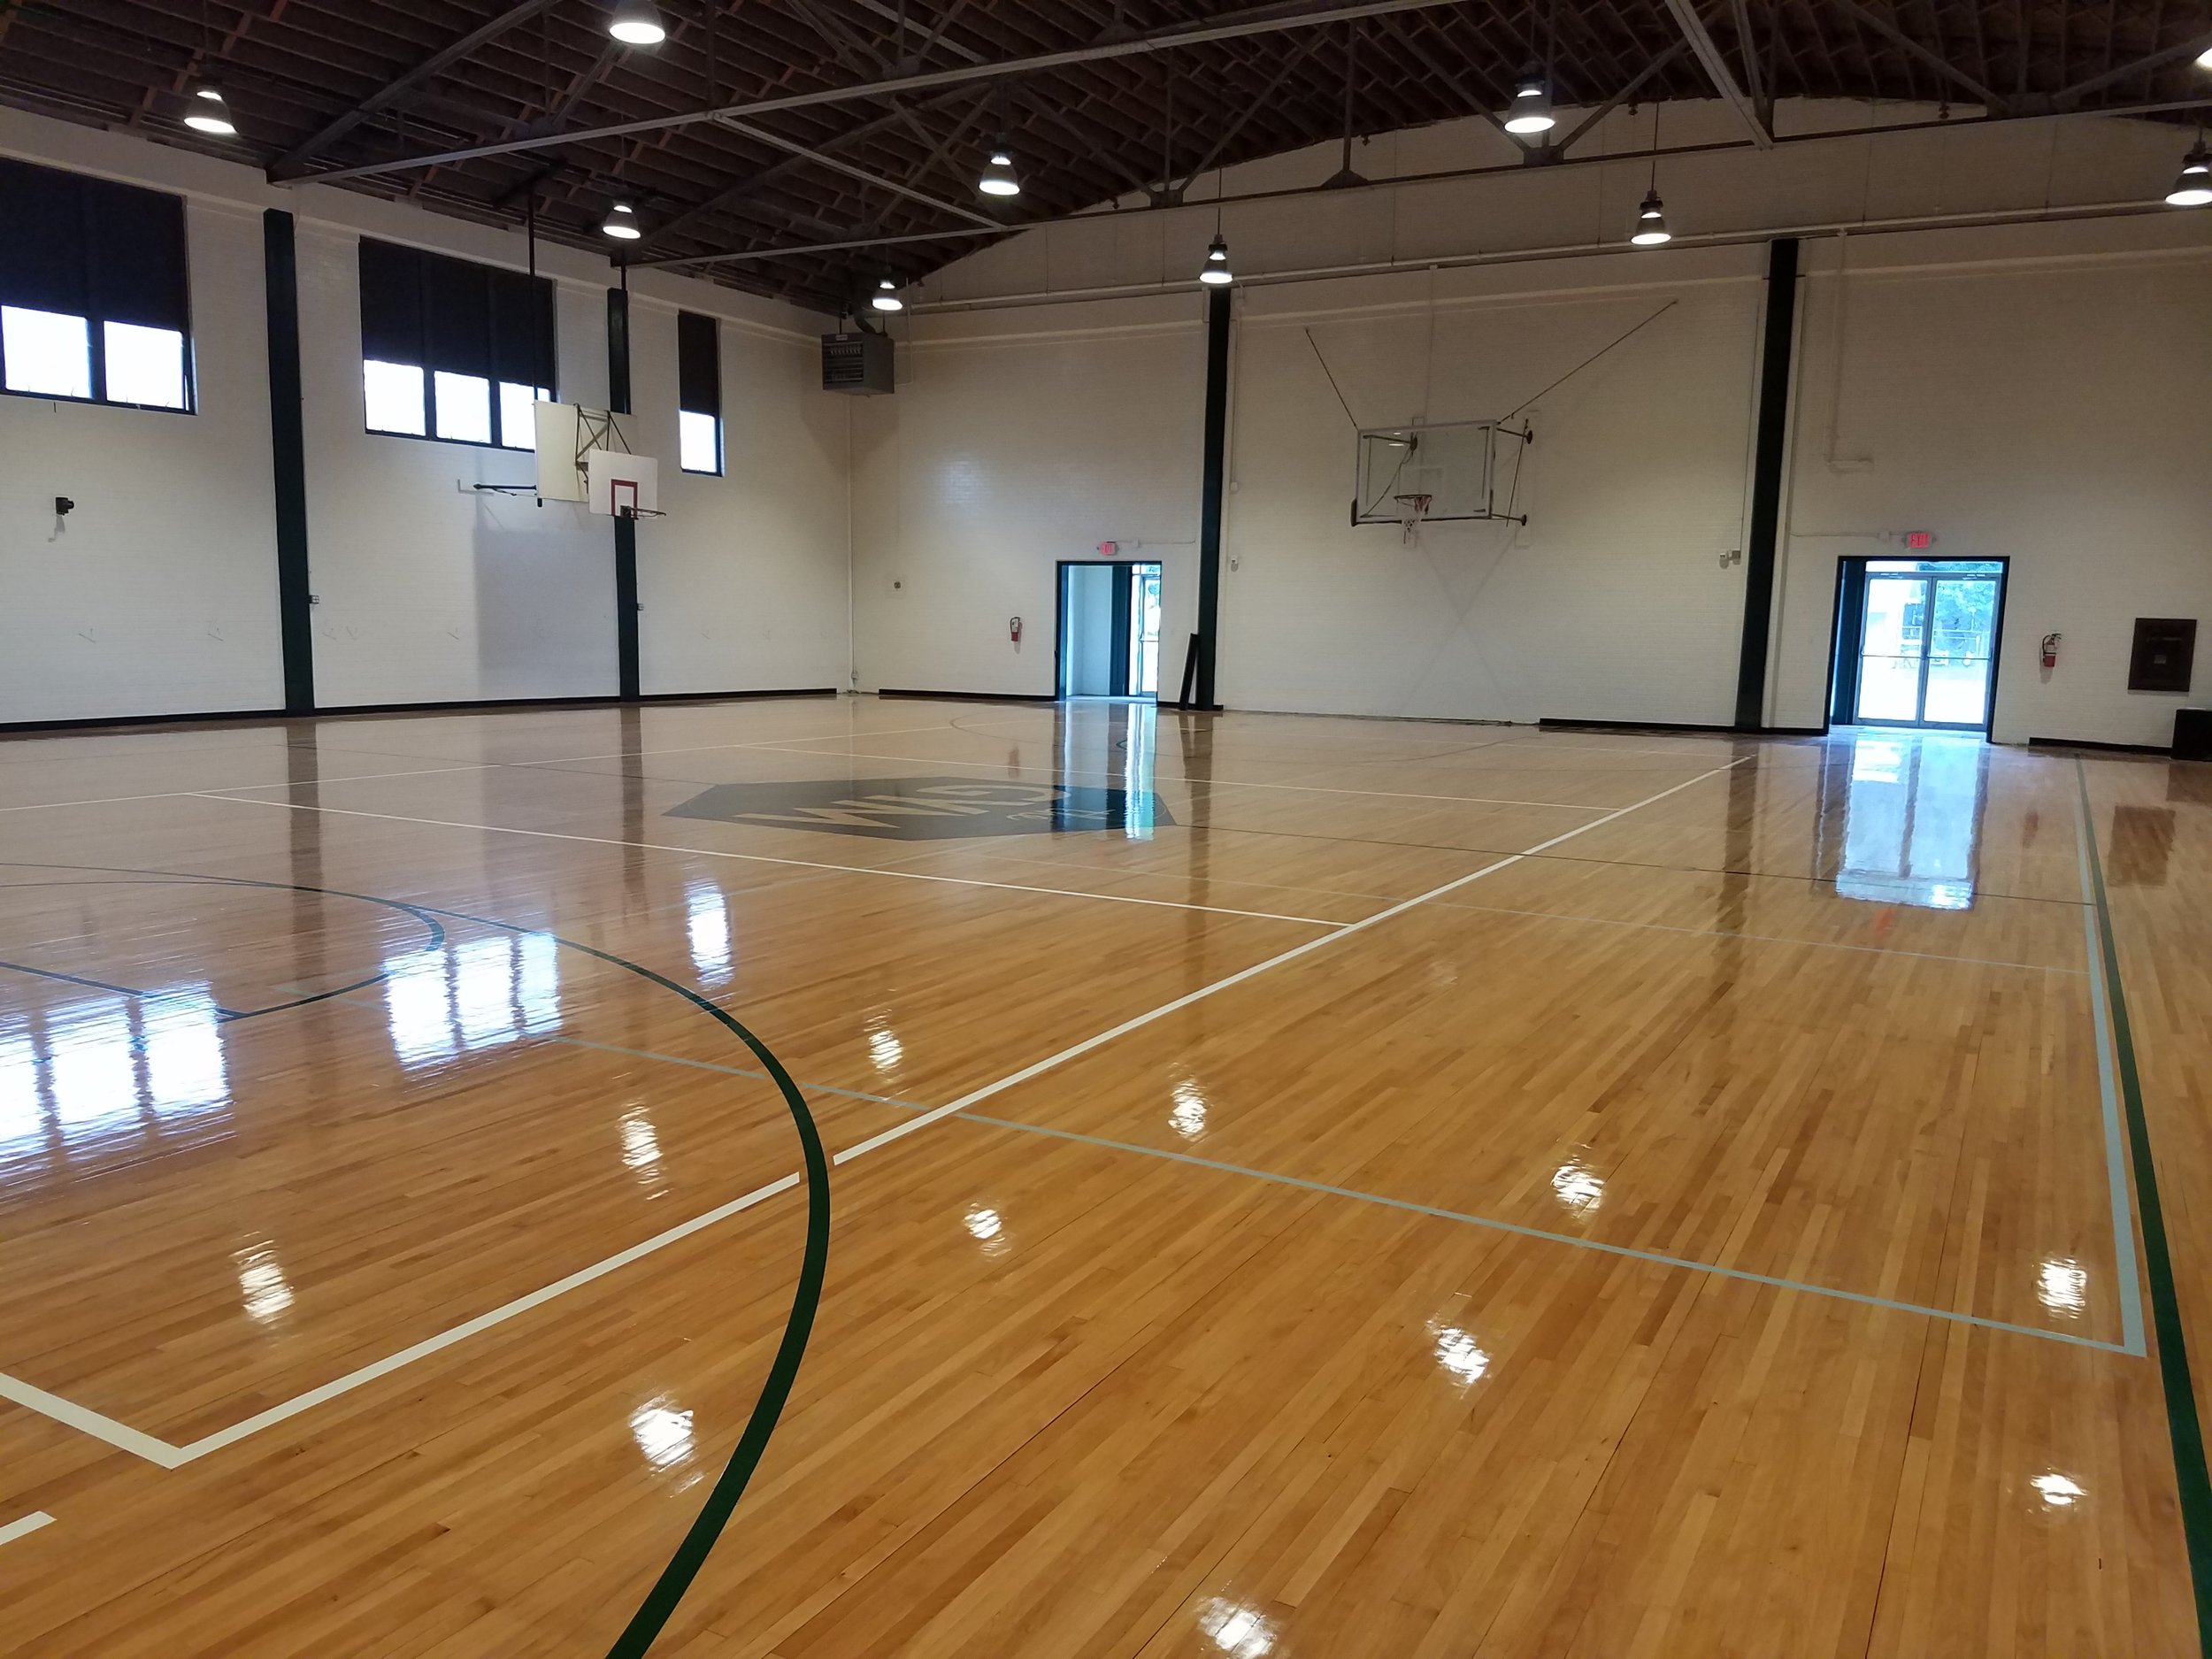 The newly remodeled Gym